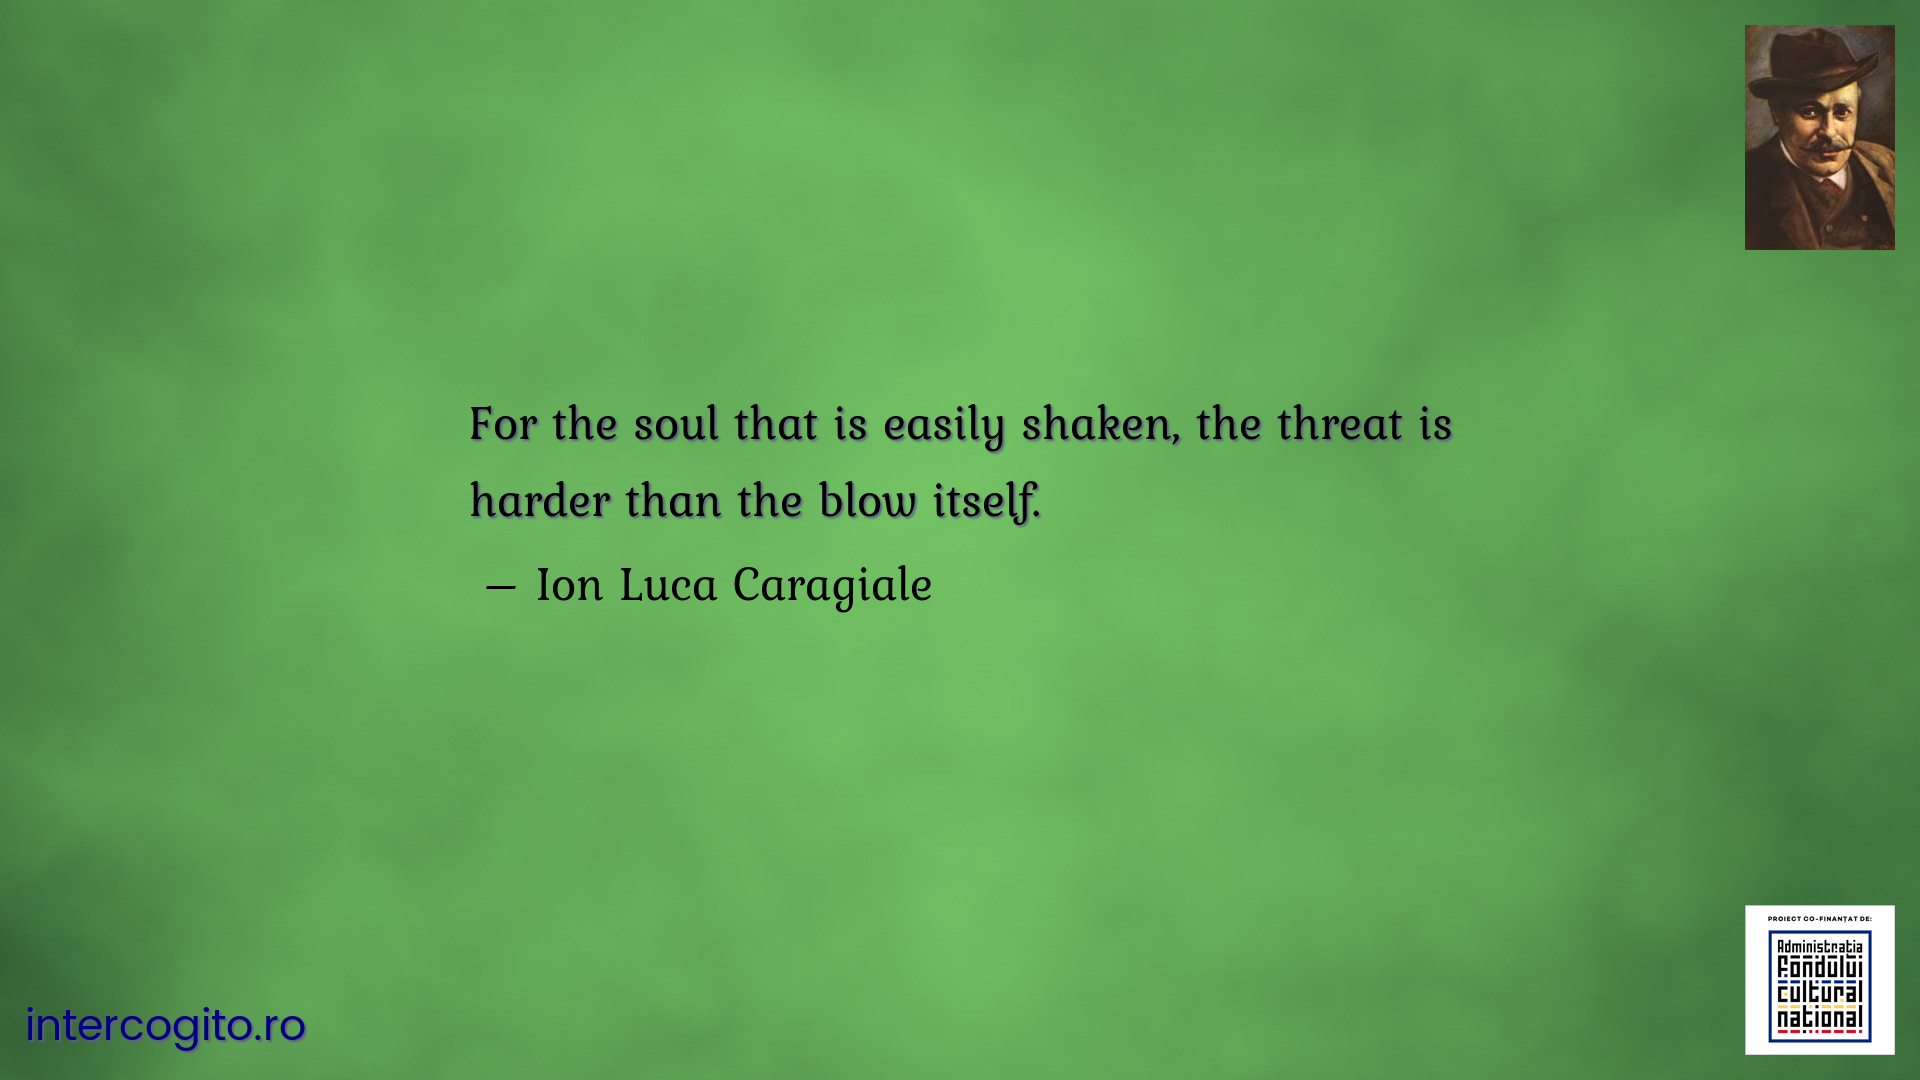 For the soul that is easily shaken, the threat is harder than the blow itself.